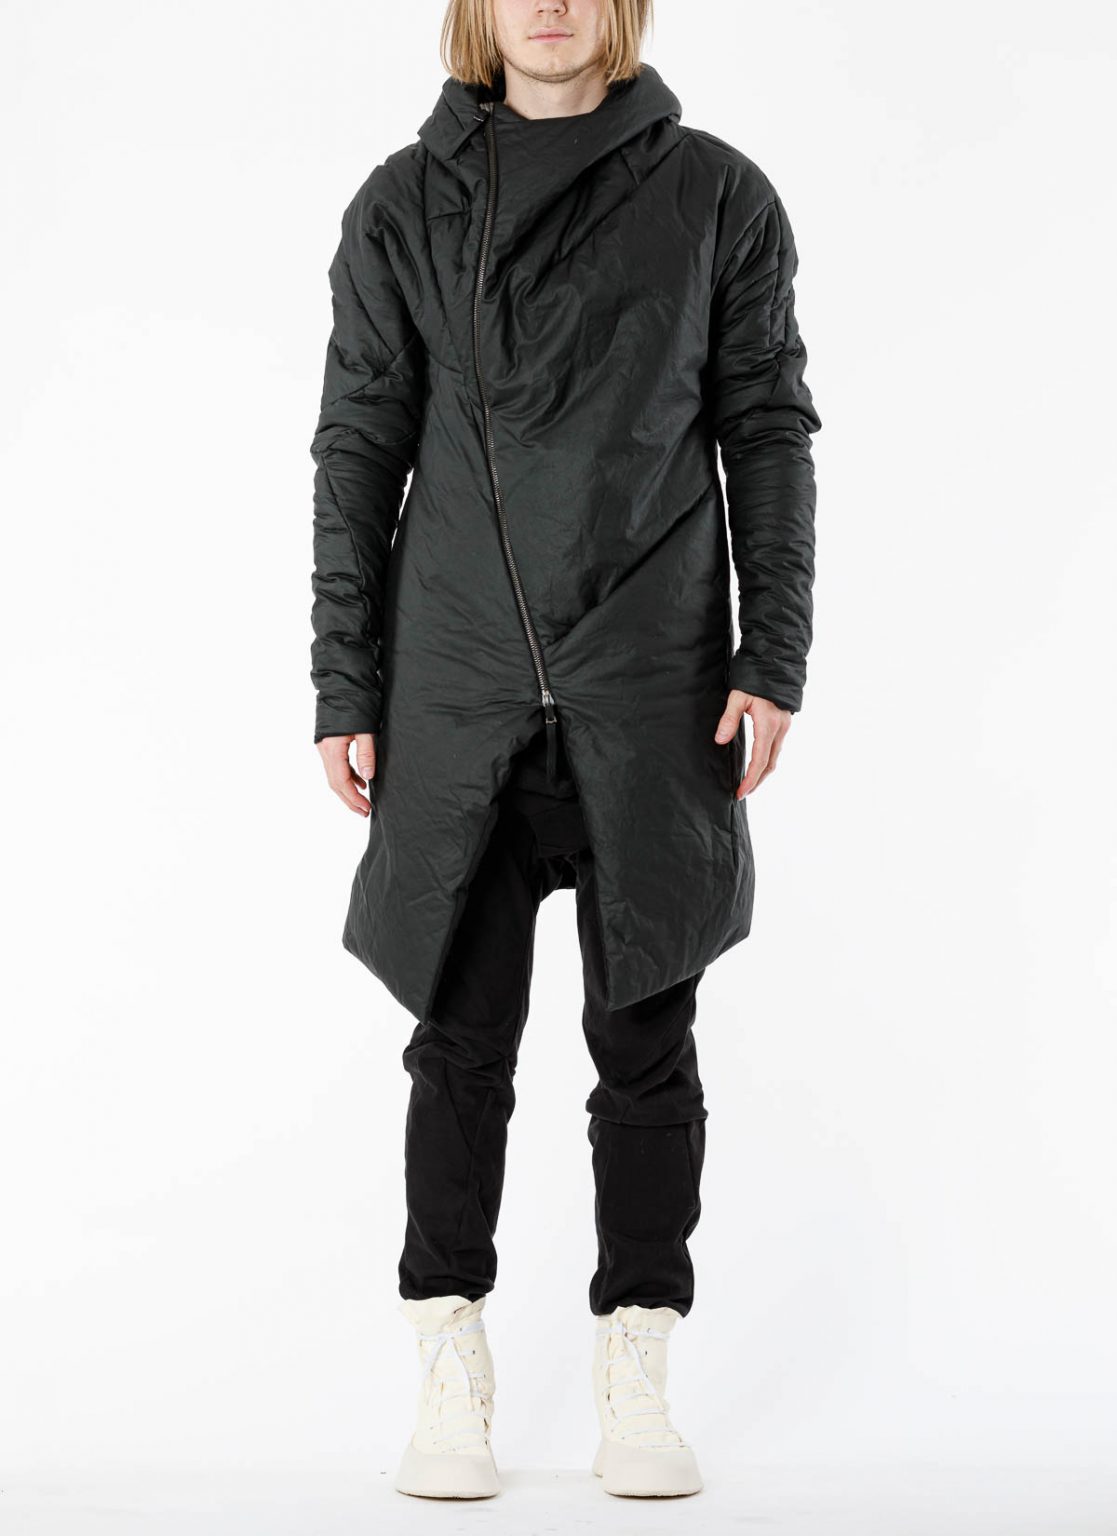 hide-m | LEON EMANUEL BLANCK Curved Hooded Coat, waxed cotton